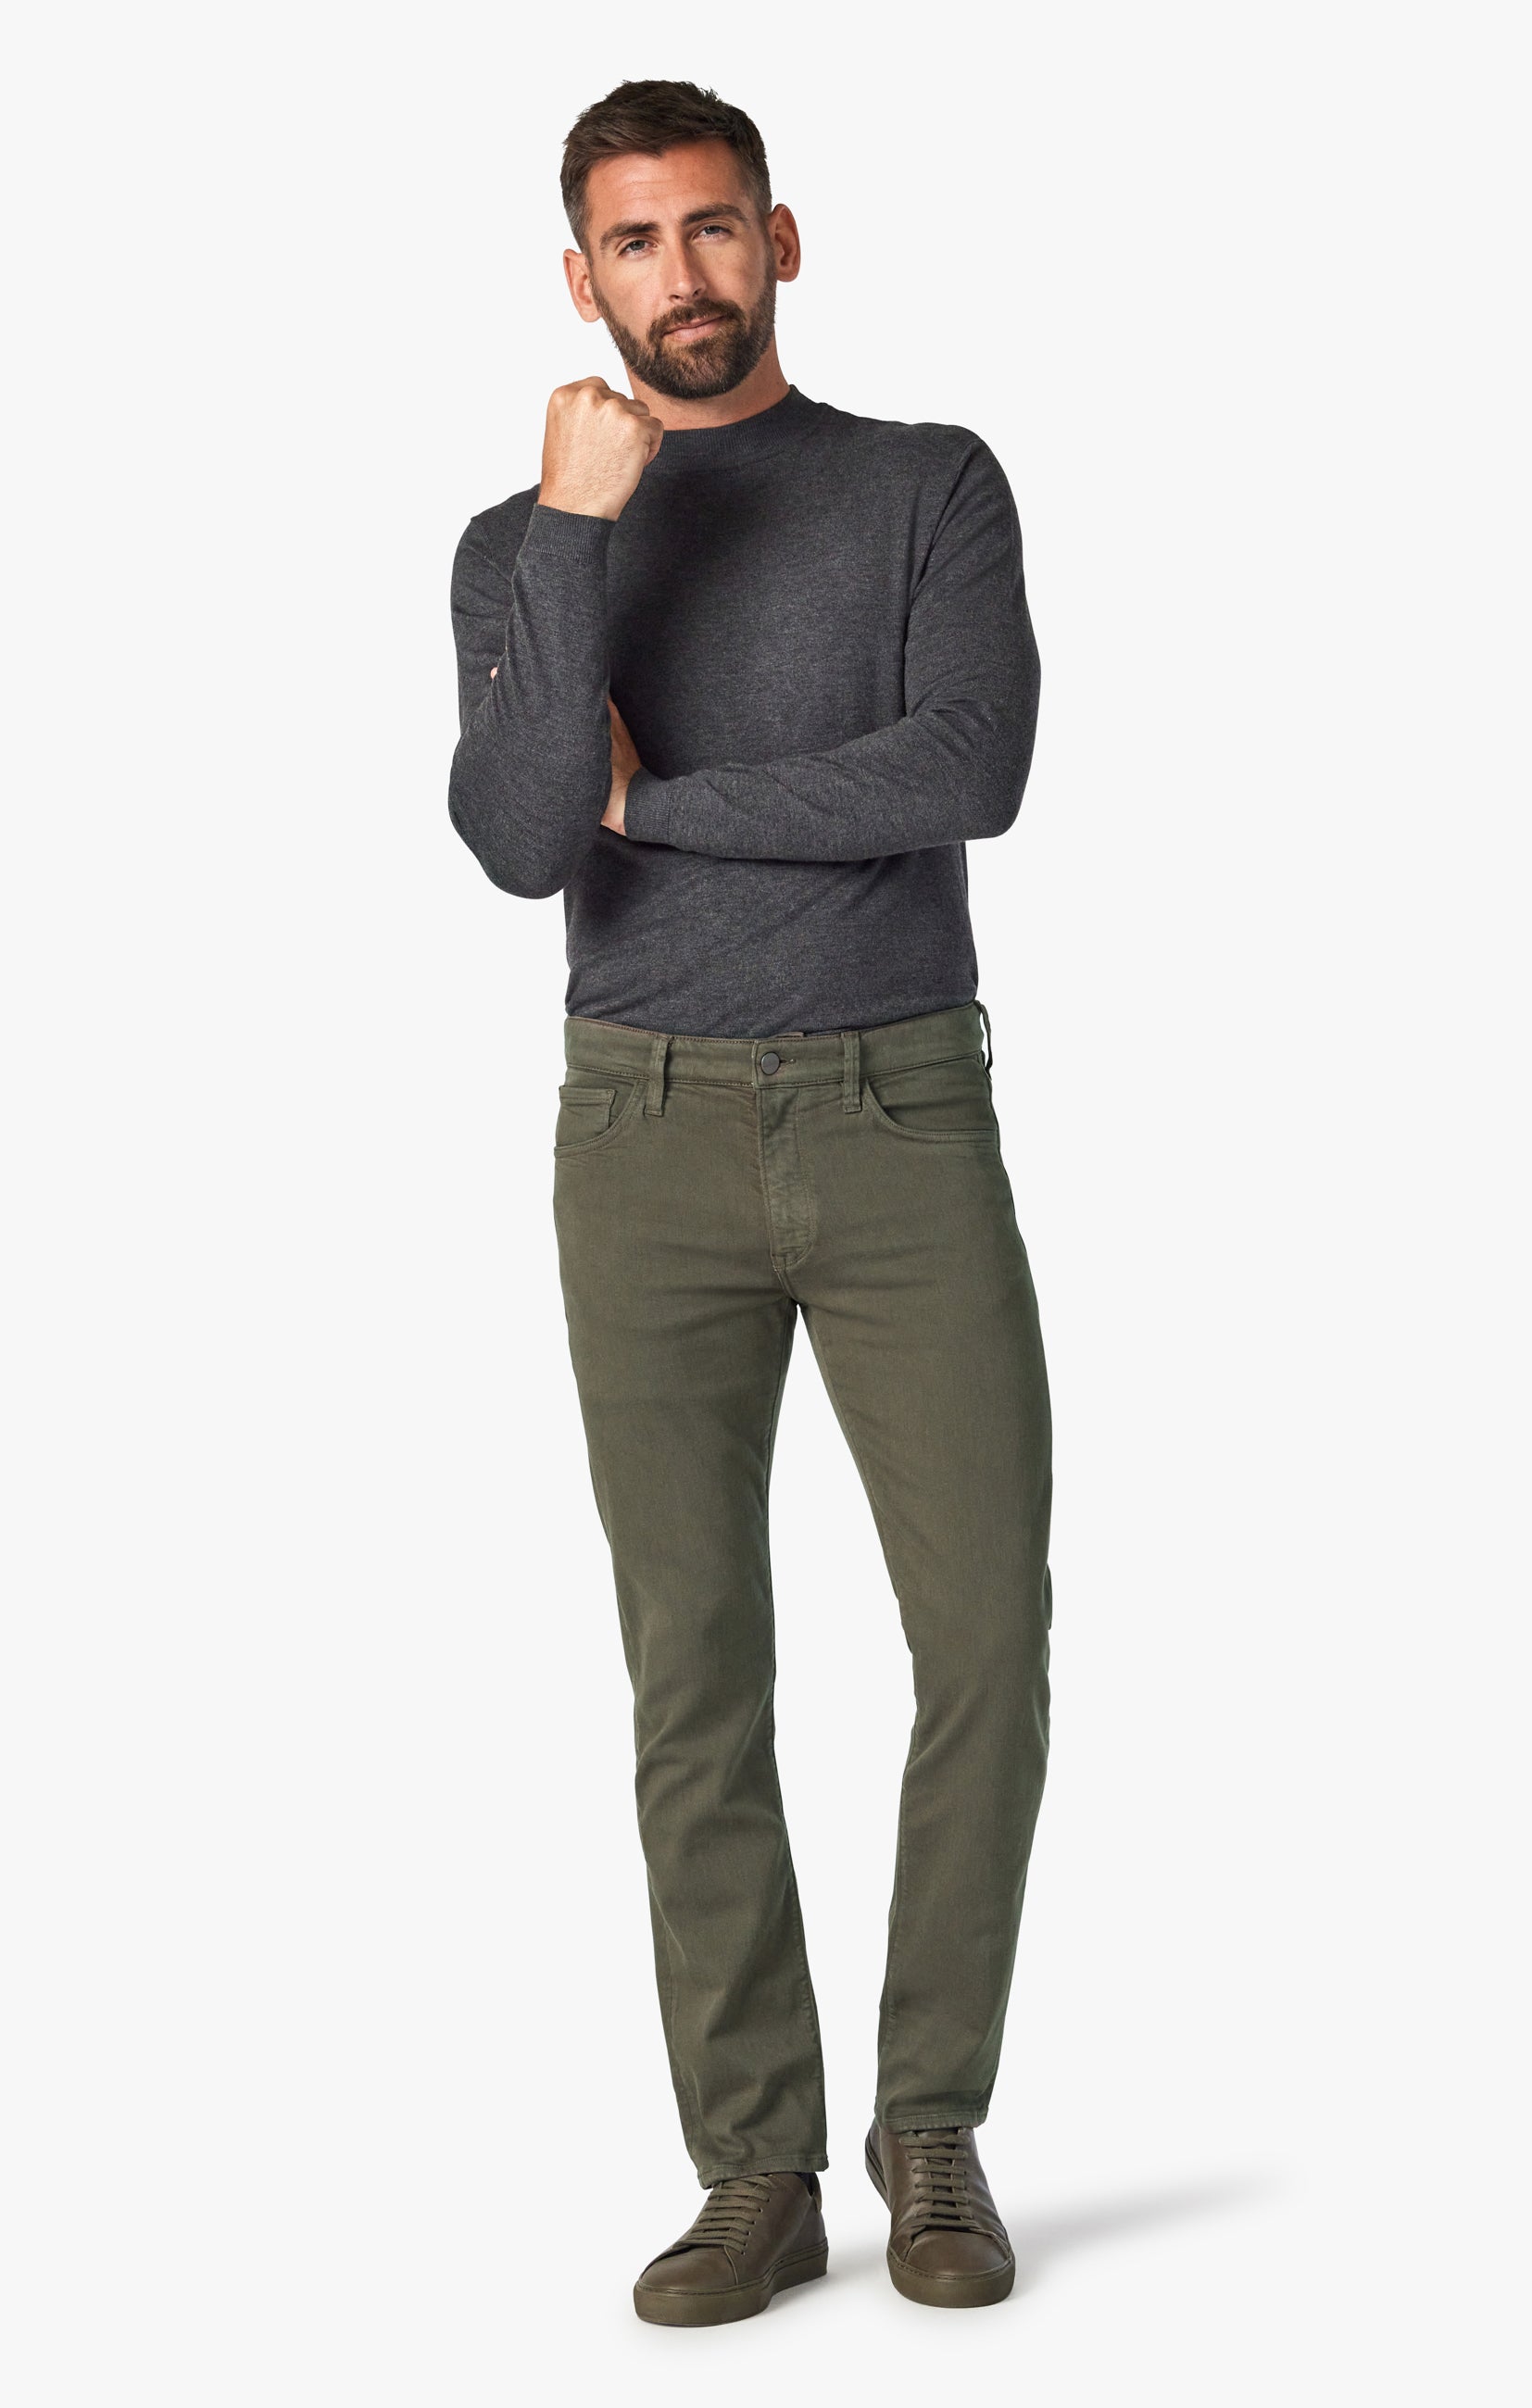 Charisma Classic Fit Pants in Green Comfort